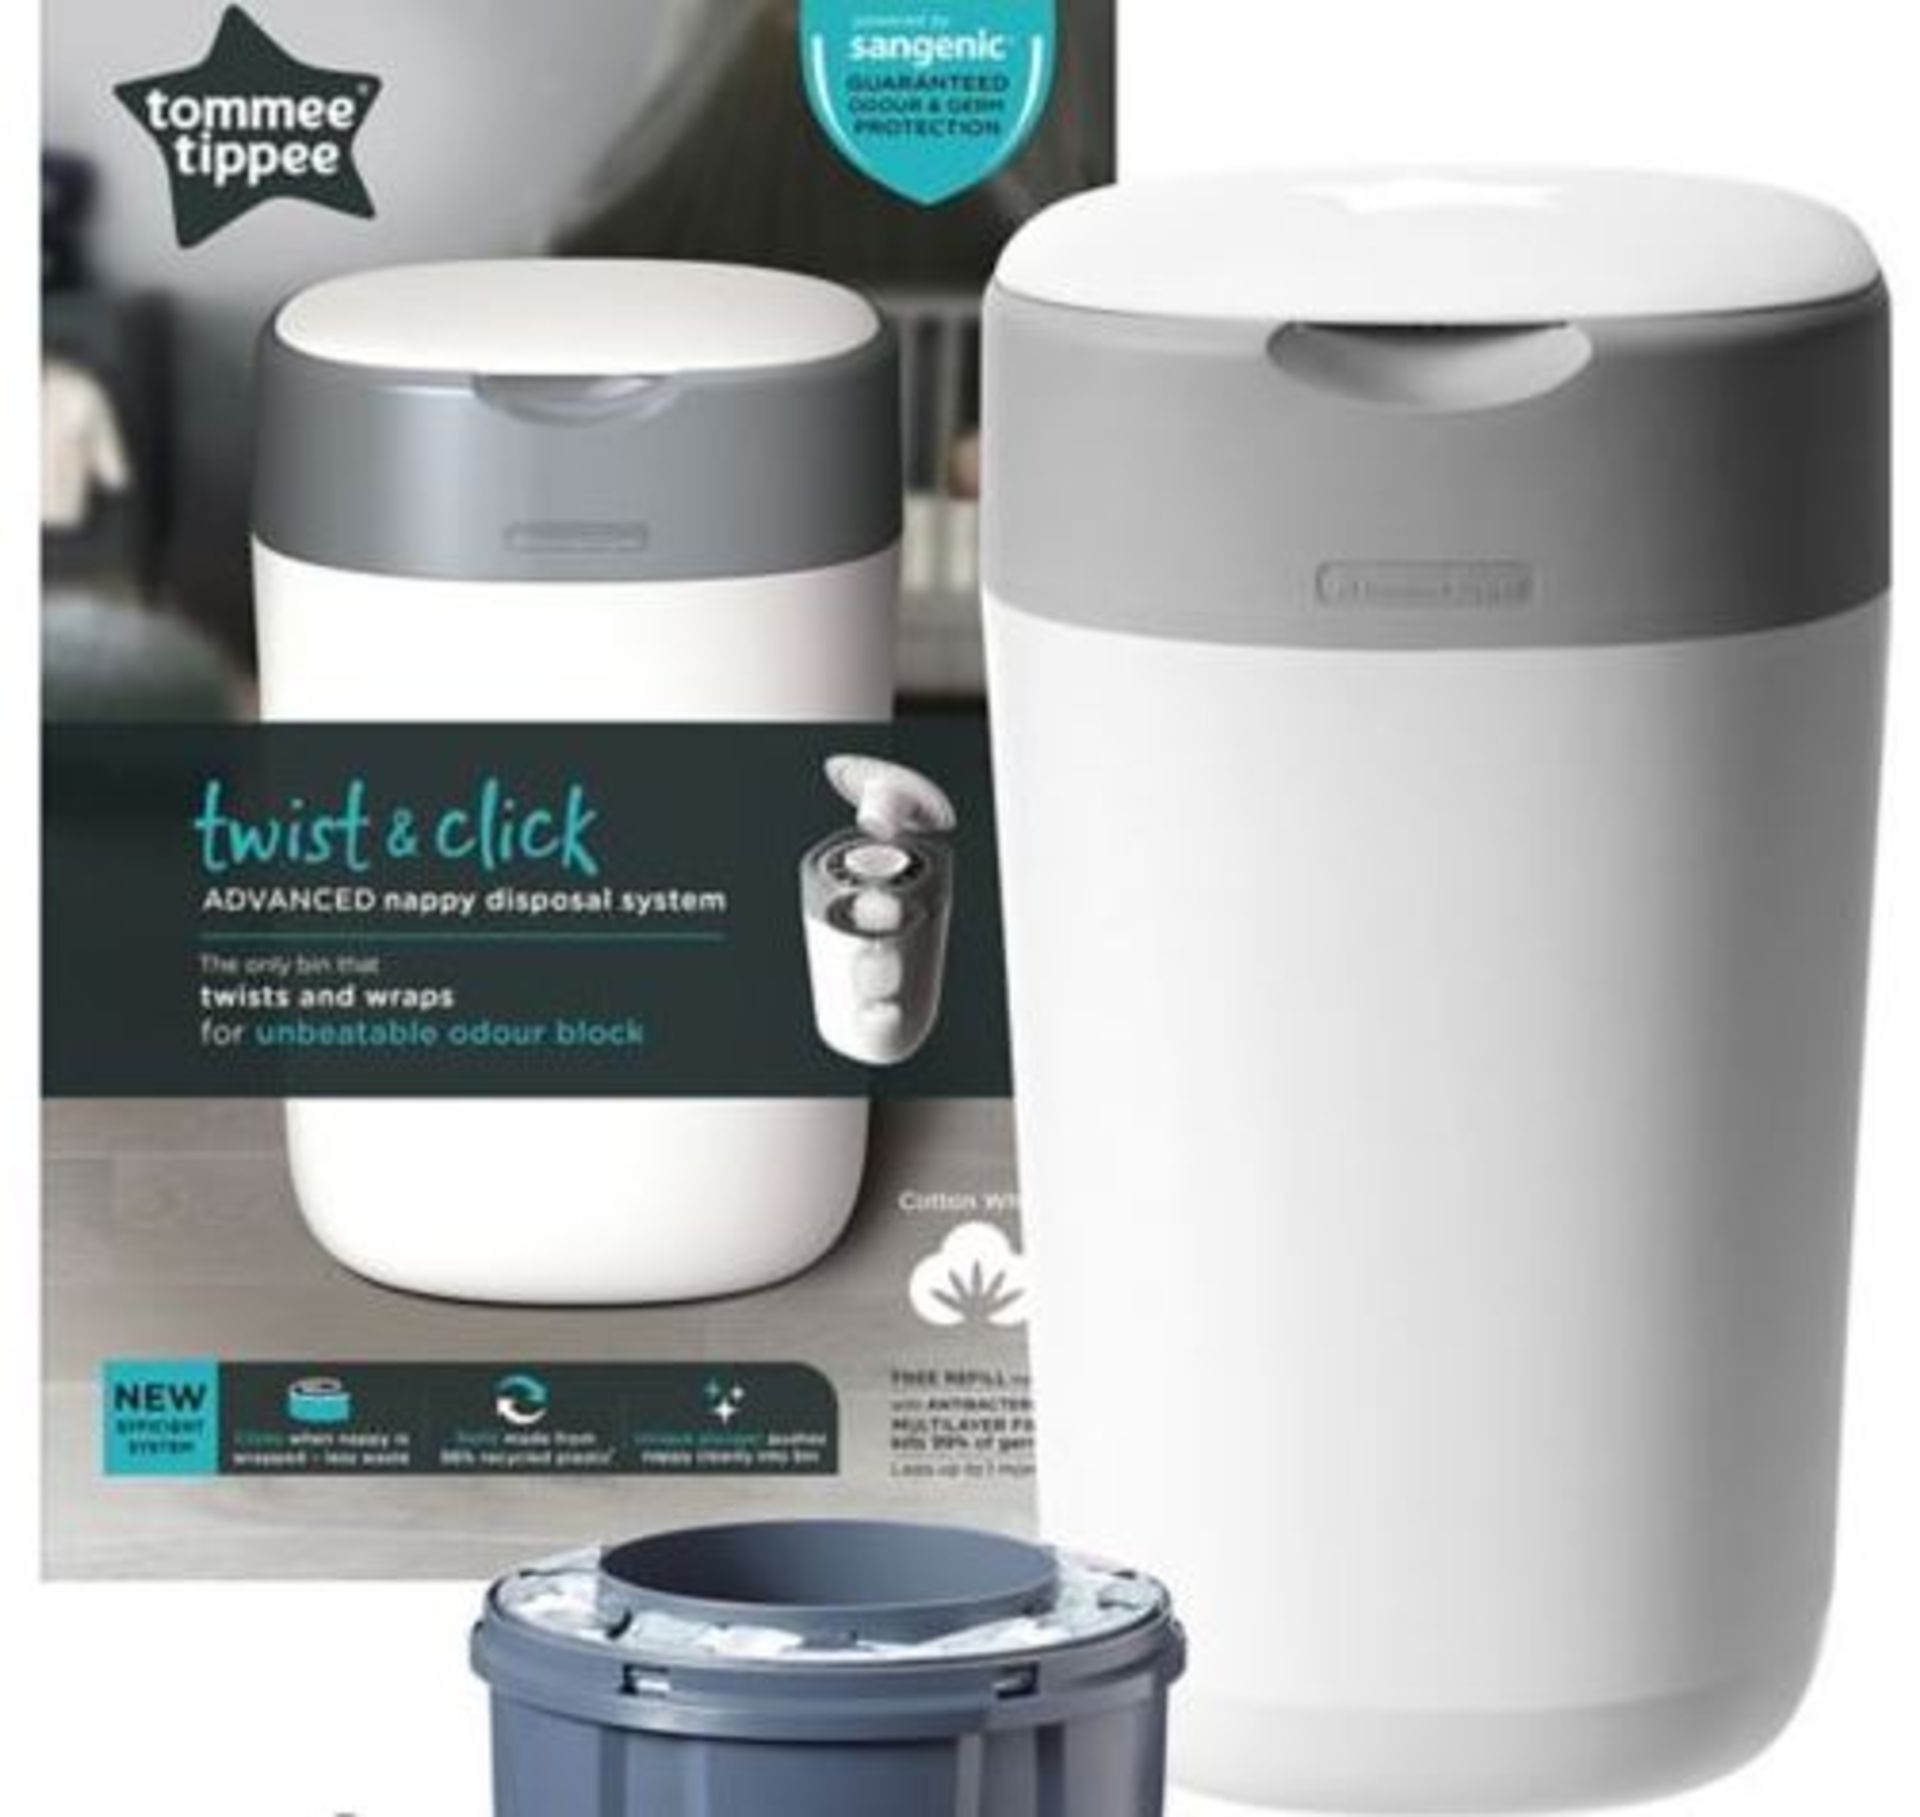 (R6B) Baby. 1 X Tommee Tippee Twist & Click Advanced Nappy Disposal System. RRP £38 (New)